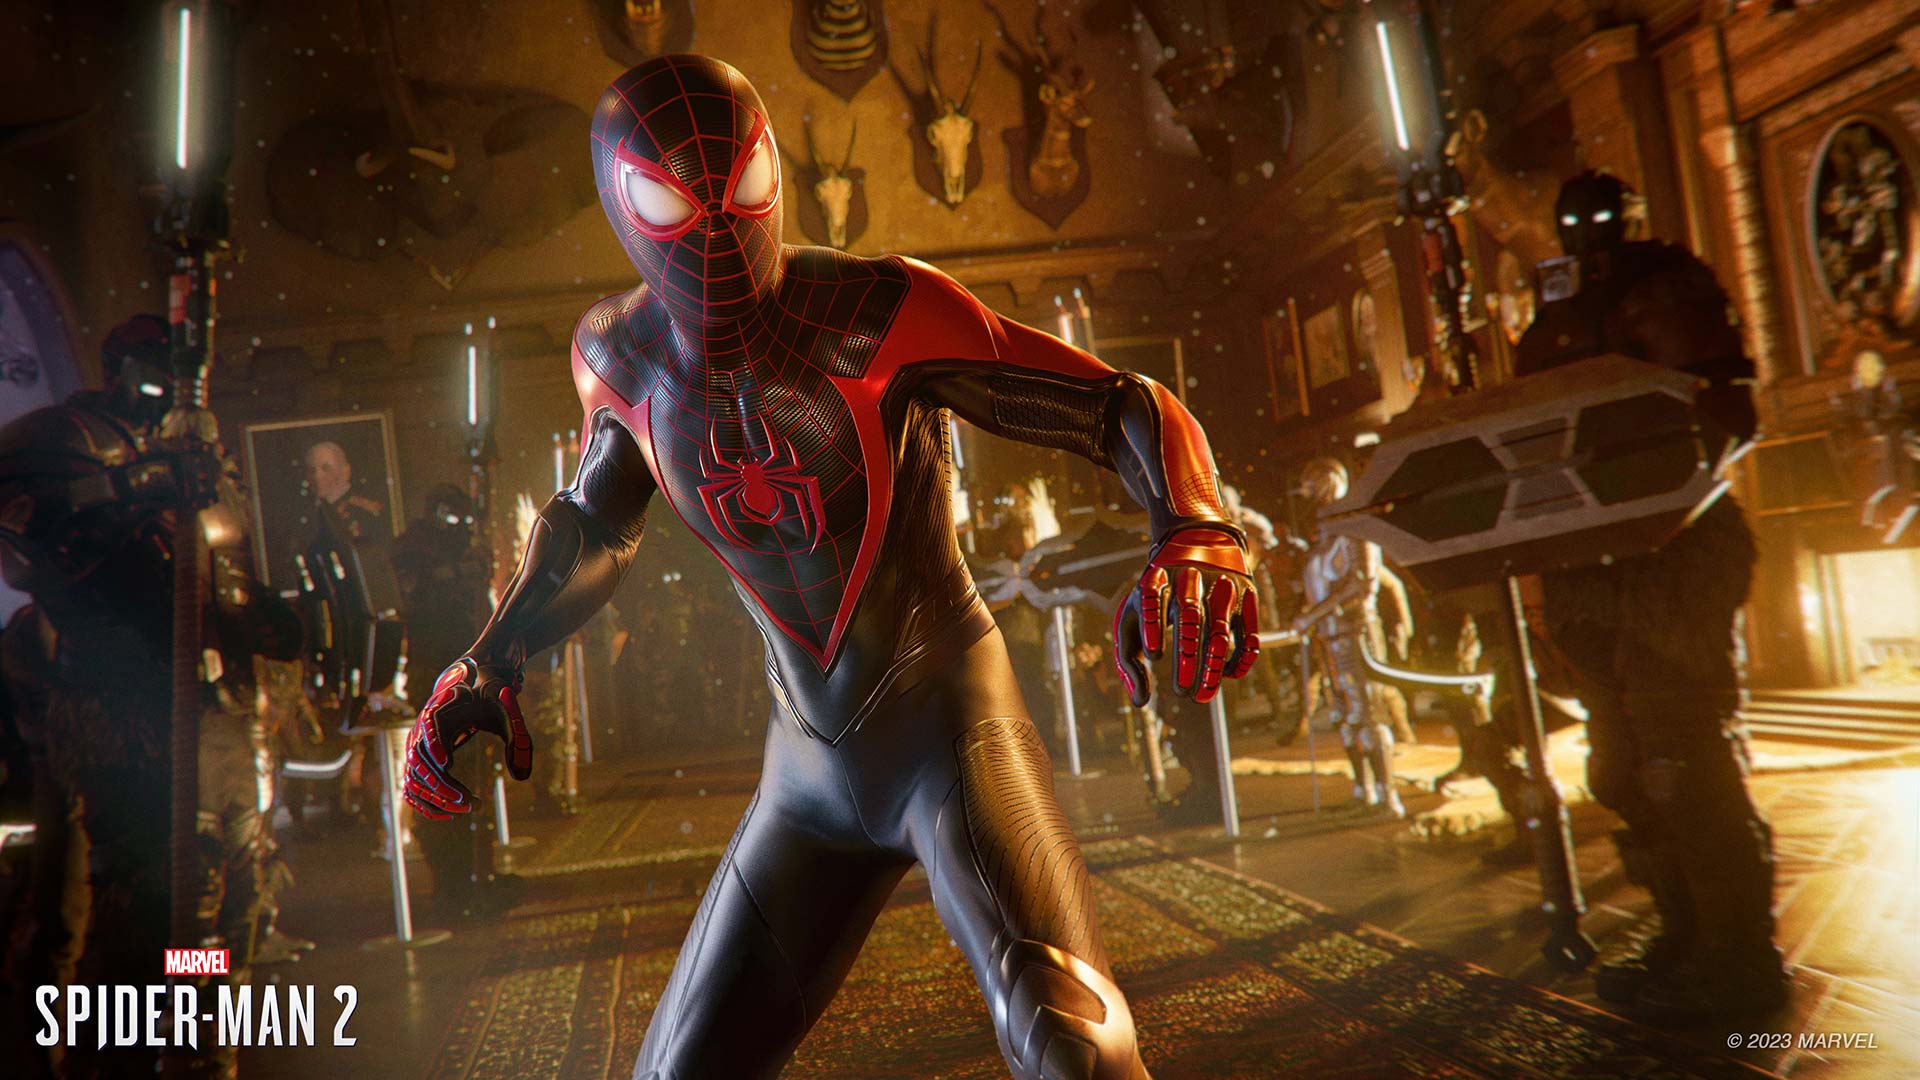 Marvel's Spider-Man 2 Review Roundup - Best Superhero Game of All Time? 